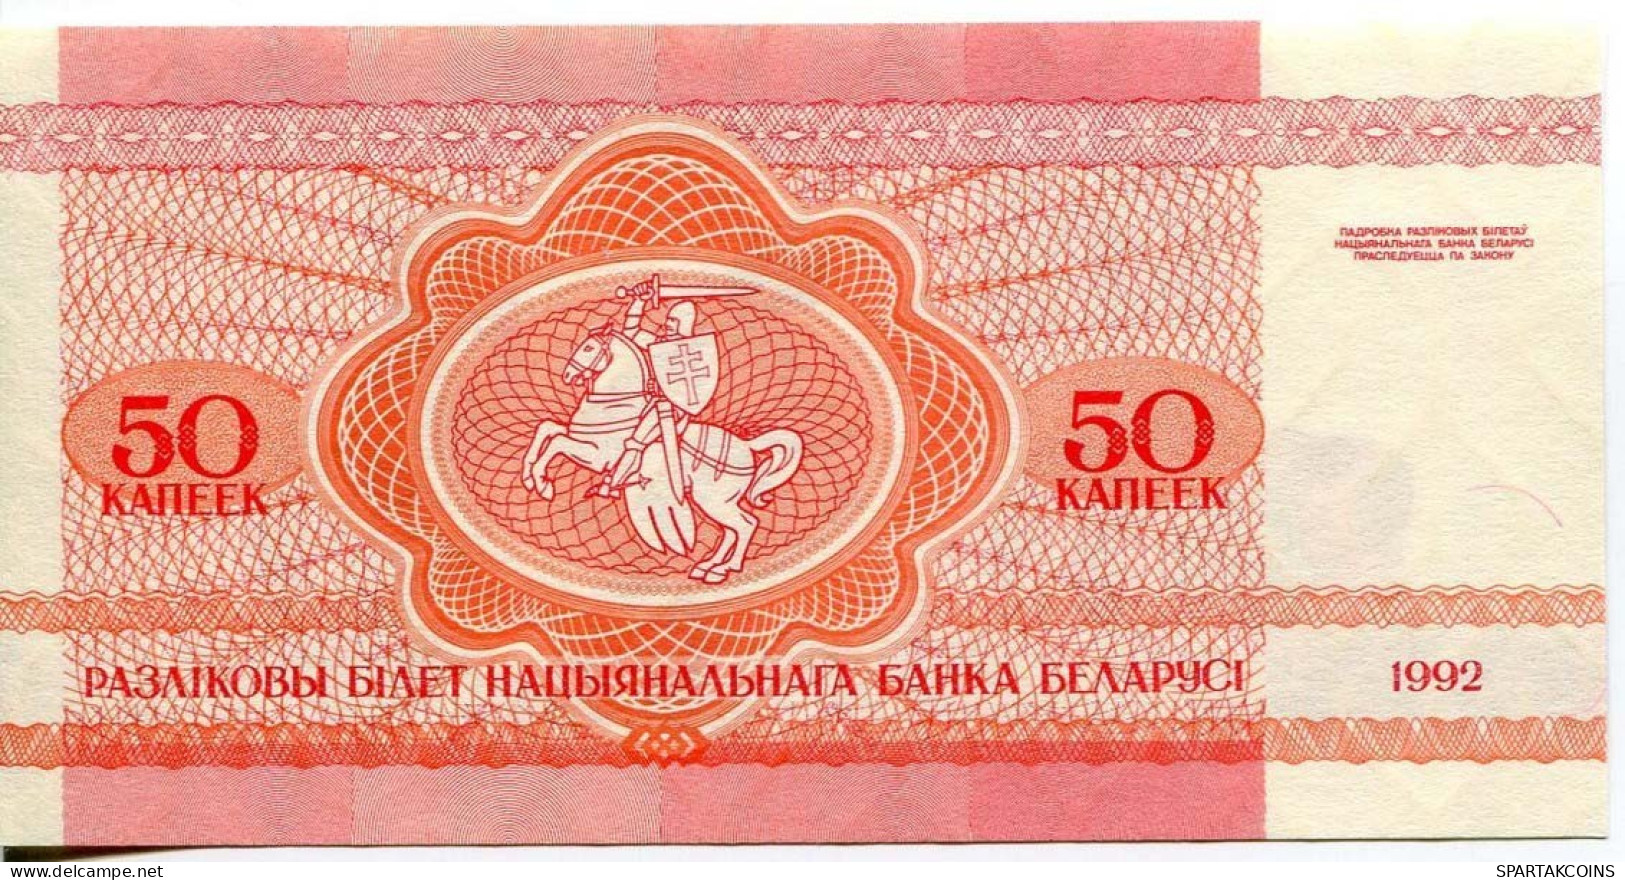 BELARUS 50 KOPECK 1992 Squirrel Paper Money Banknote #P10191.V - [11] Local Banknote Issues